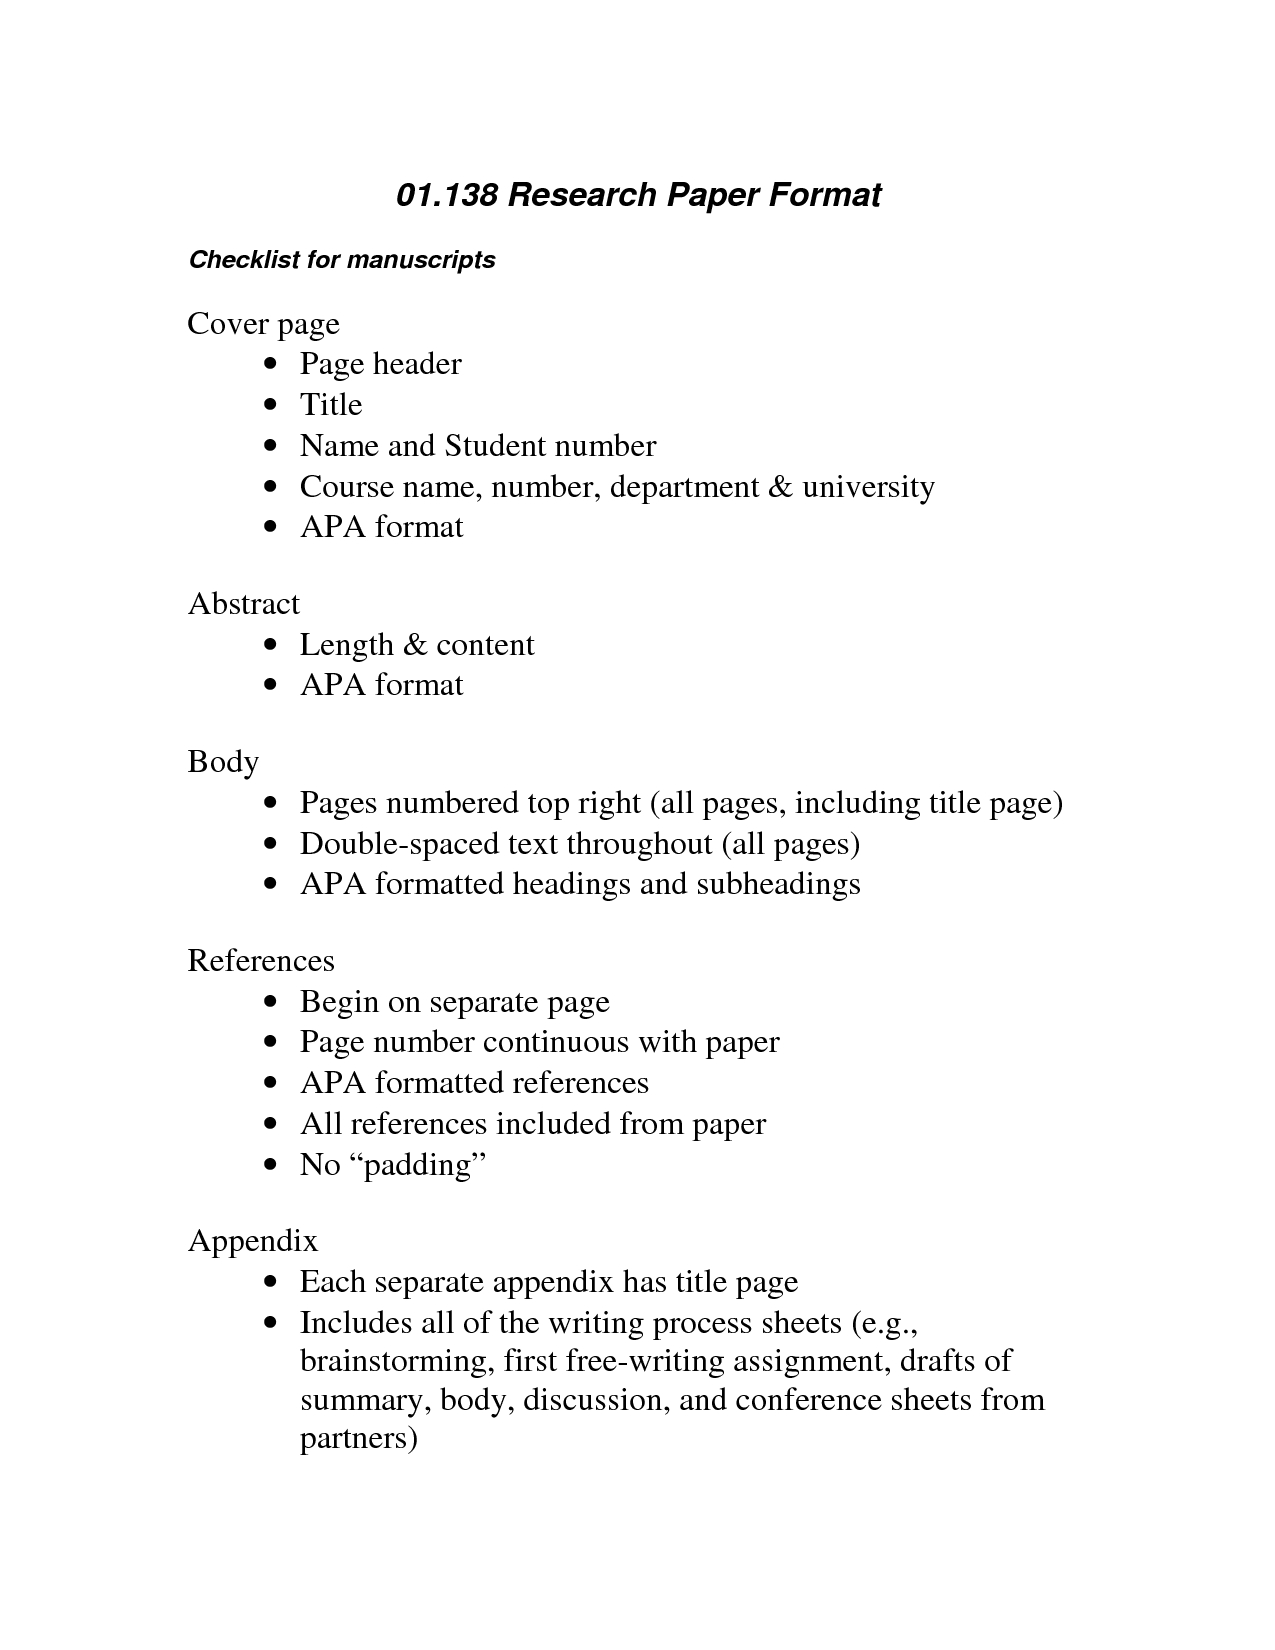 Research Paper Template Apa Format Check List Scope Of Work Regarding Apa Research Paper Template Word 2010